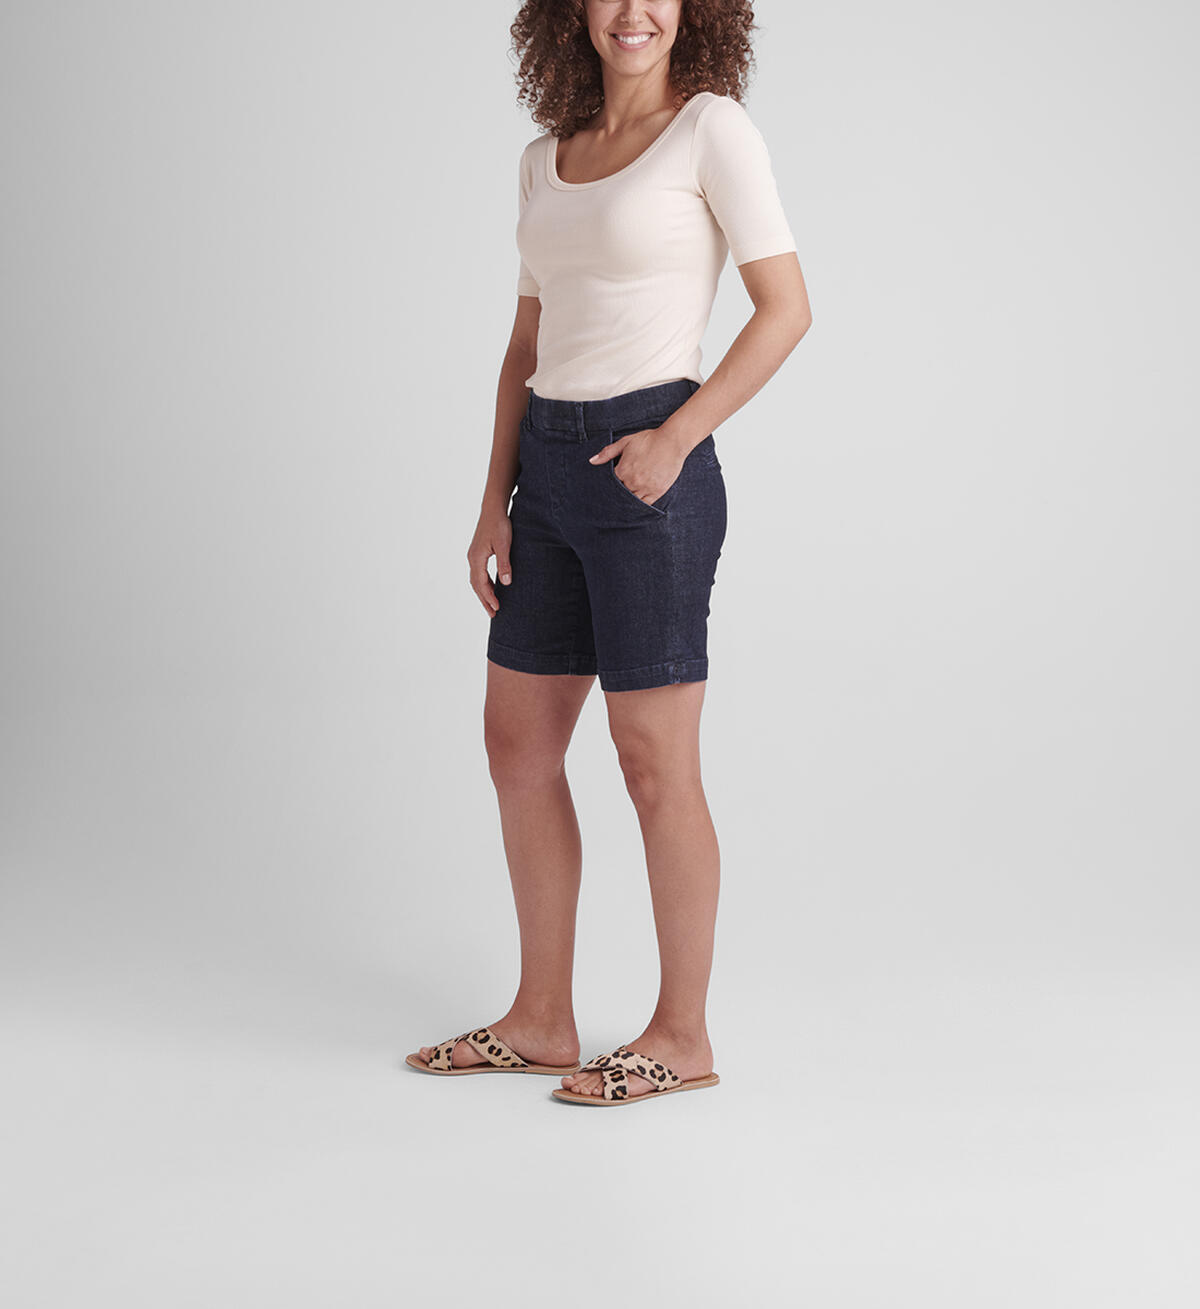 Maddie Mid Rise 8-inch Pull-On Short Petite, , hi-res image number 2